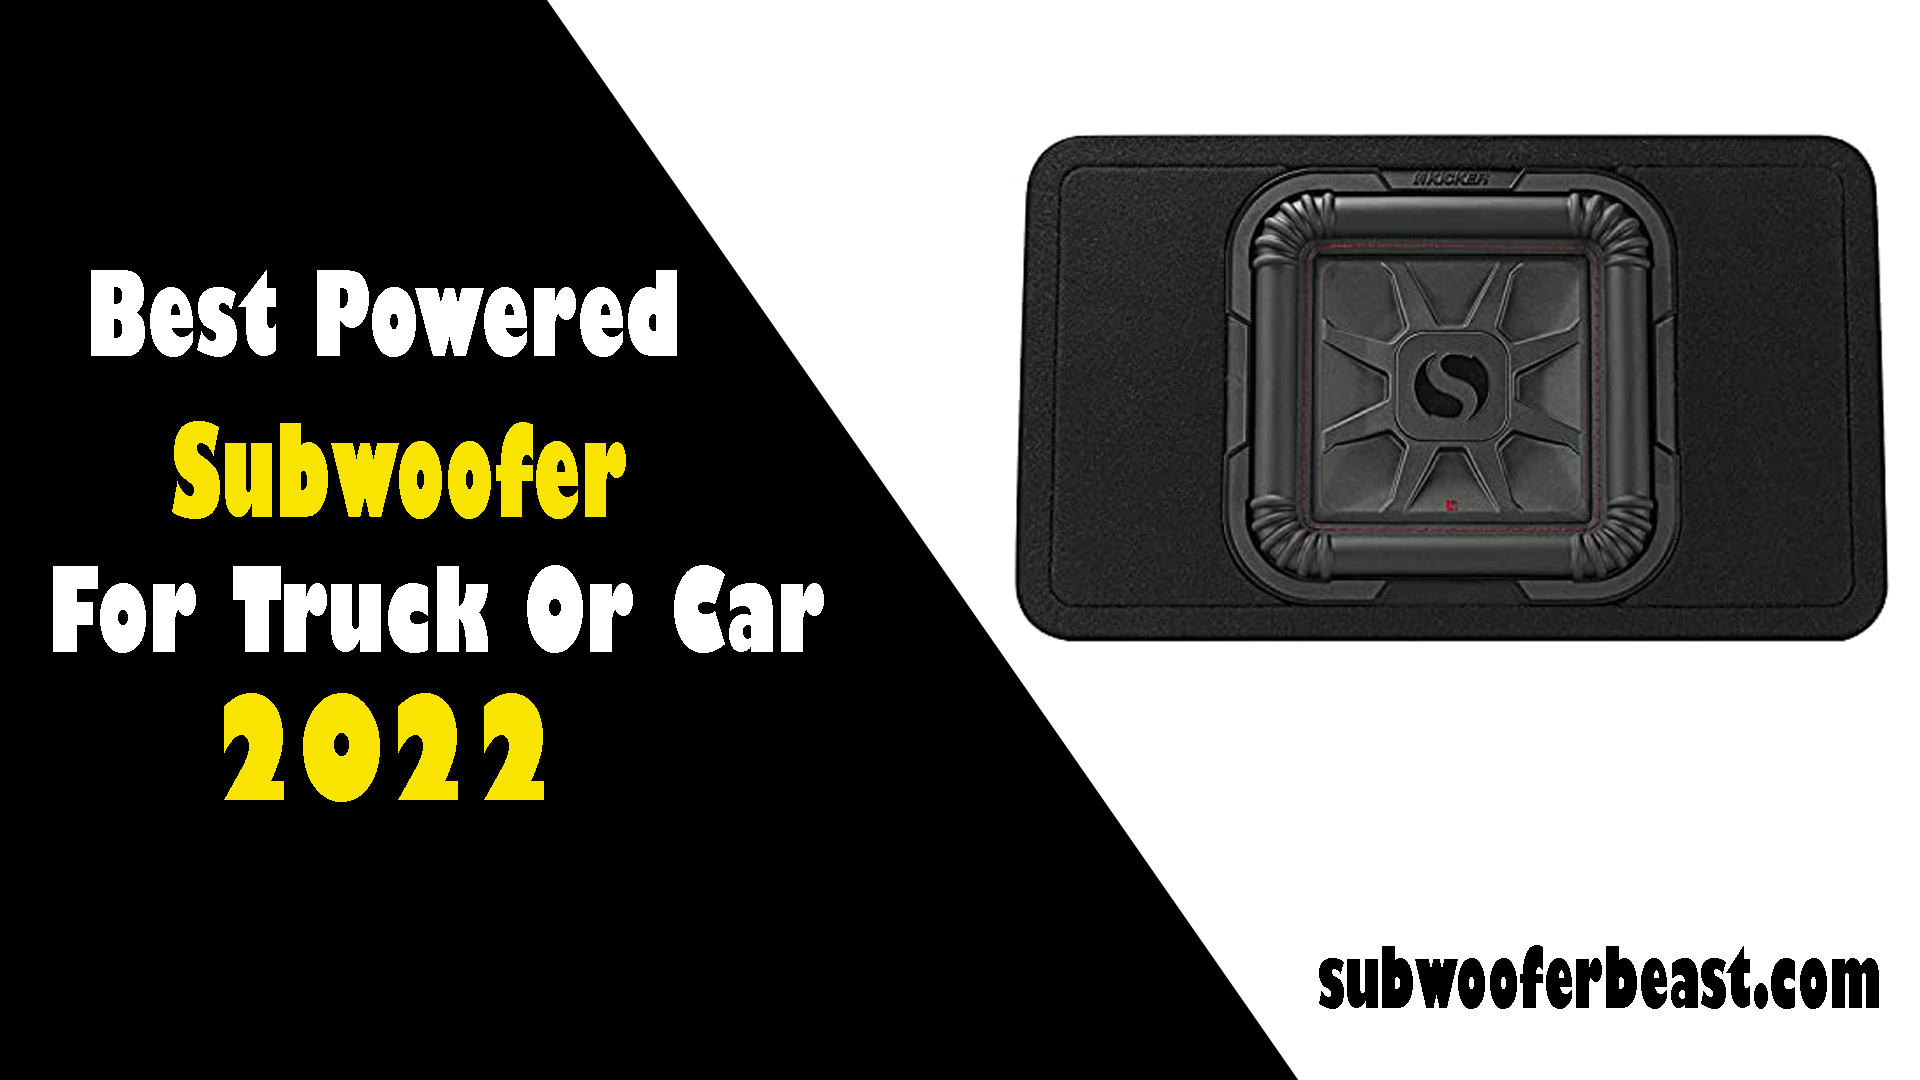 Best Powered Subwoofer For Truck Or Car 2022